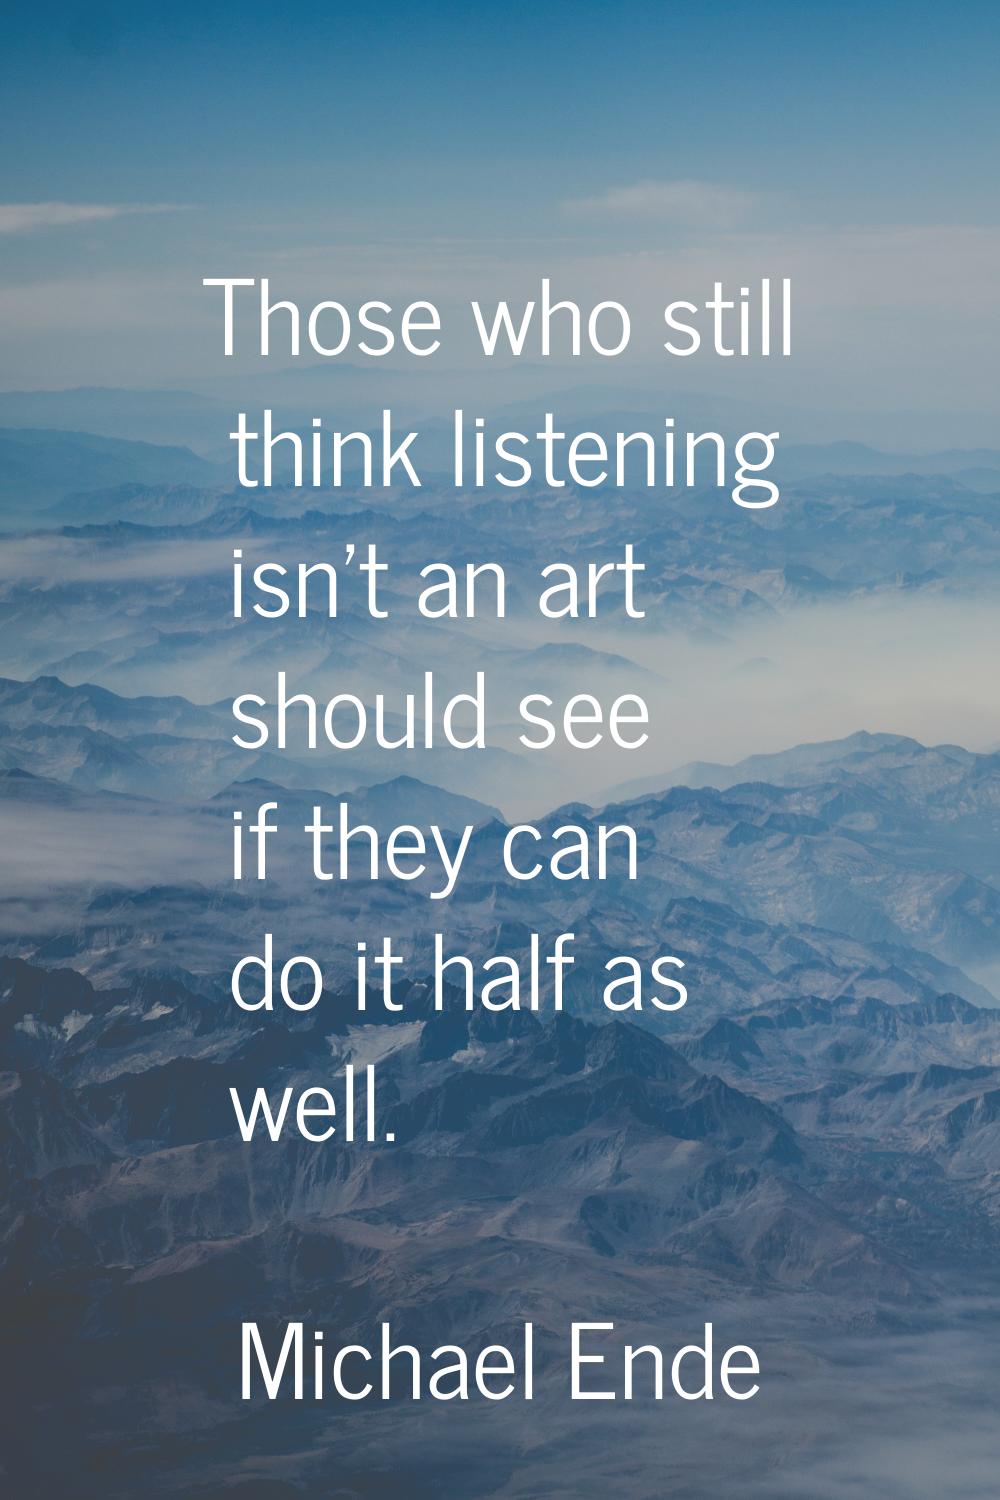 Those who still think listening isn't an art should see if they can do it half as well.